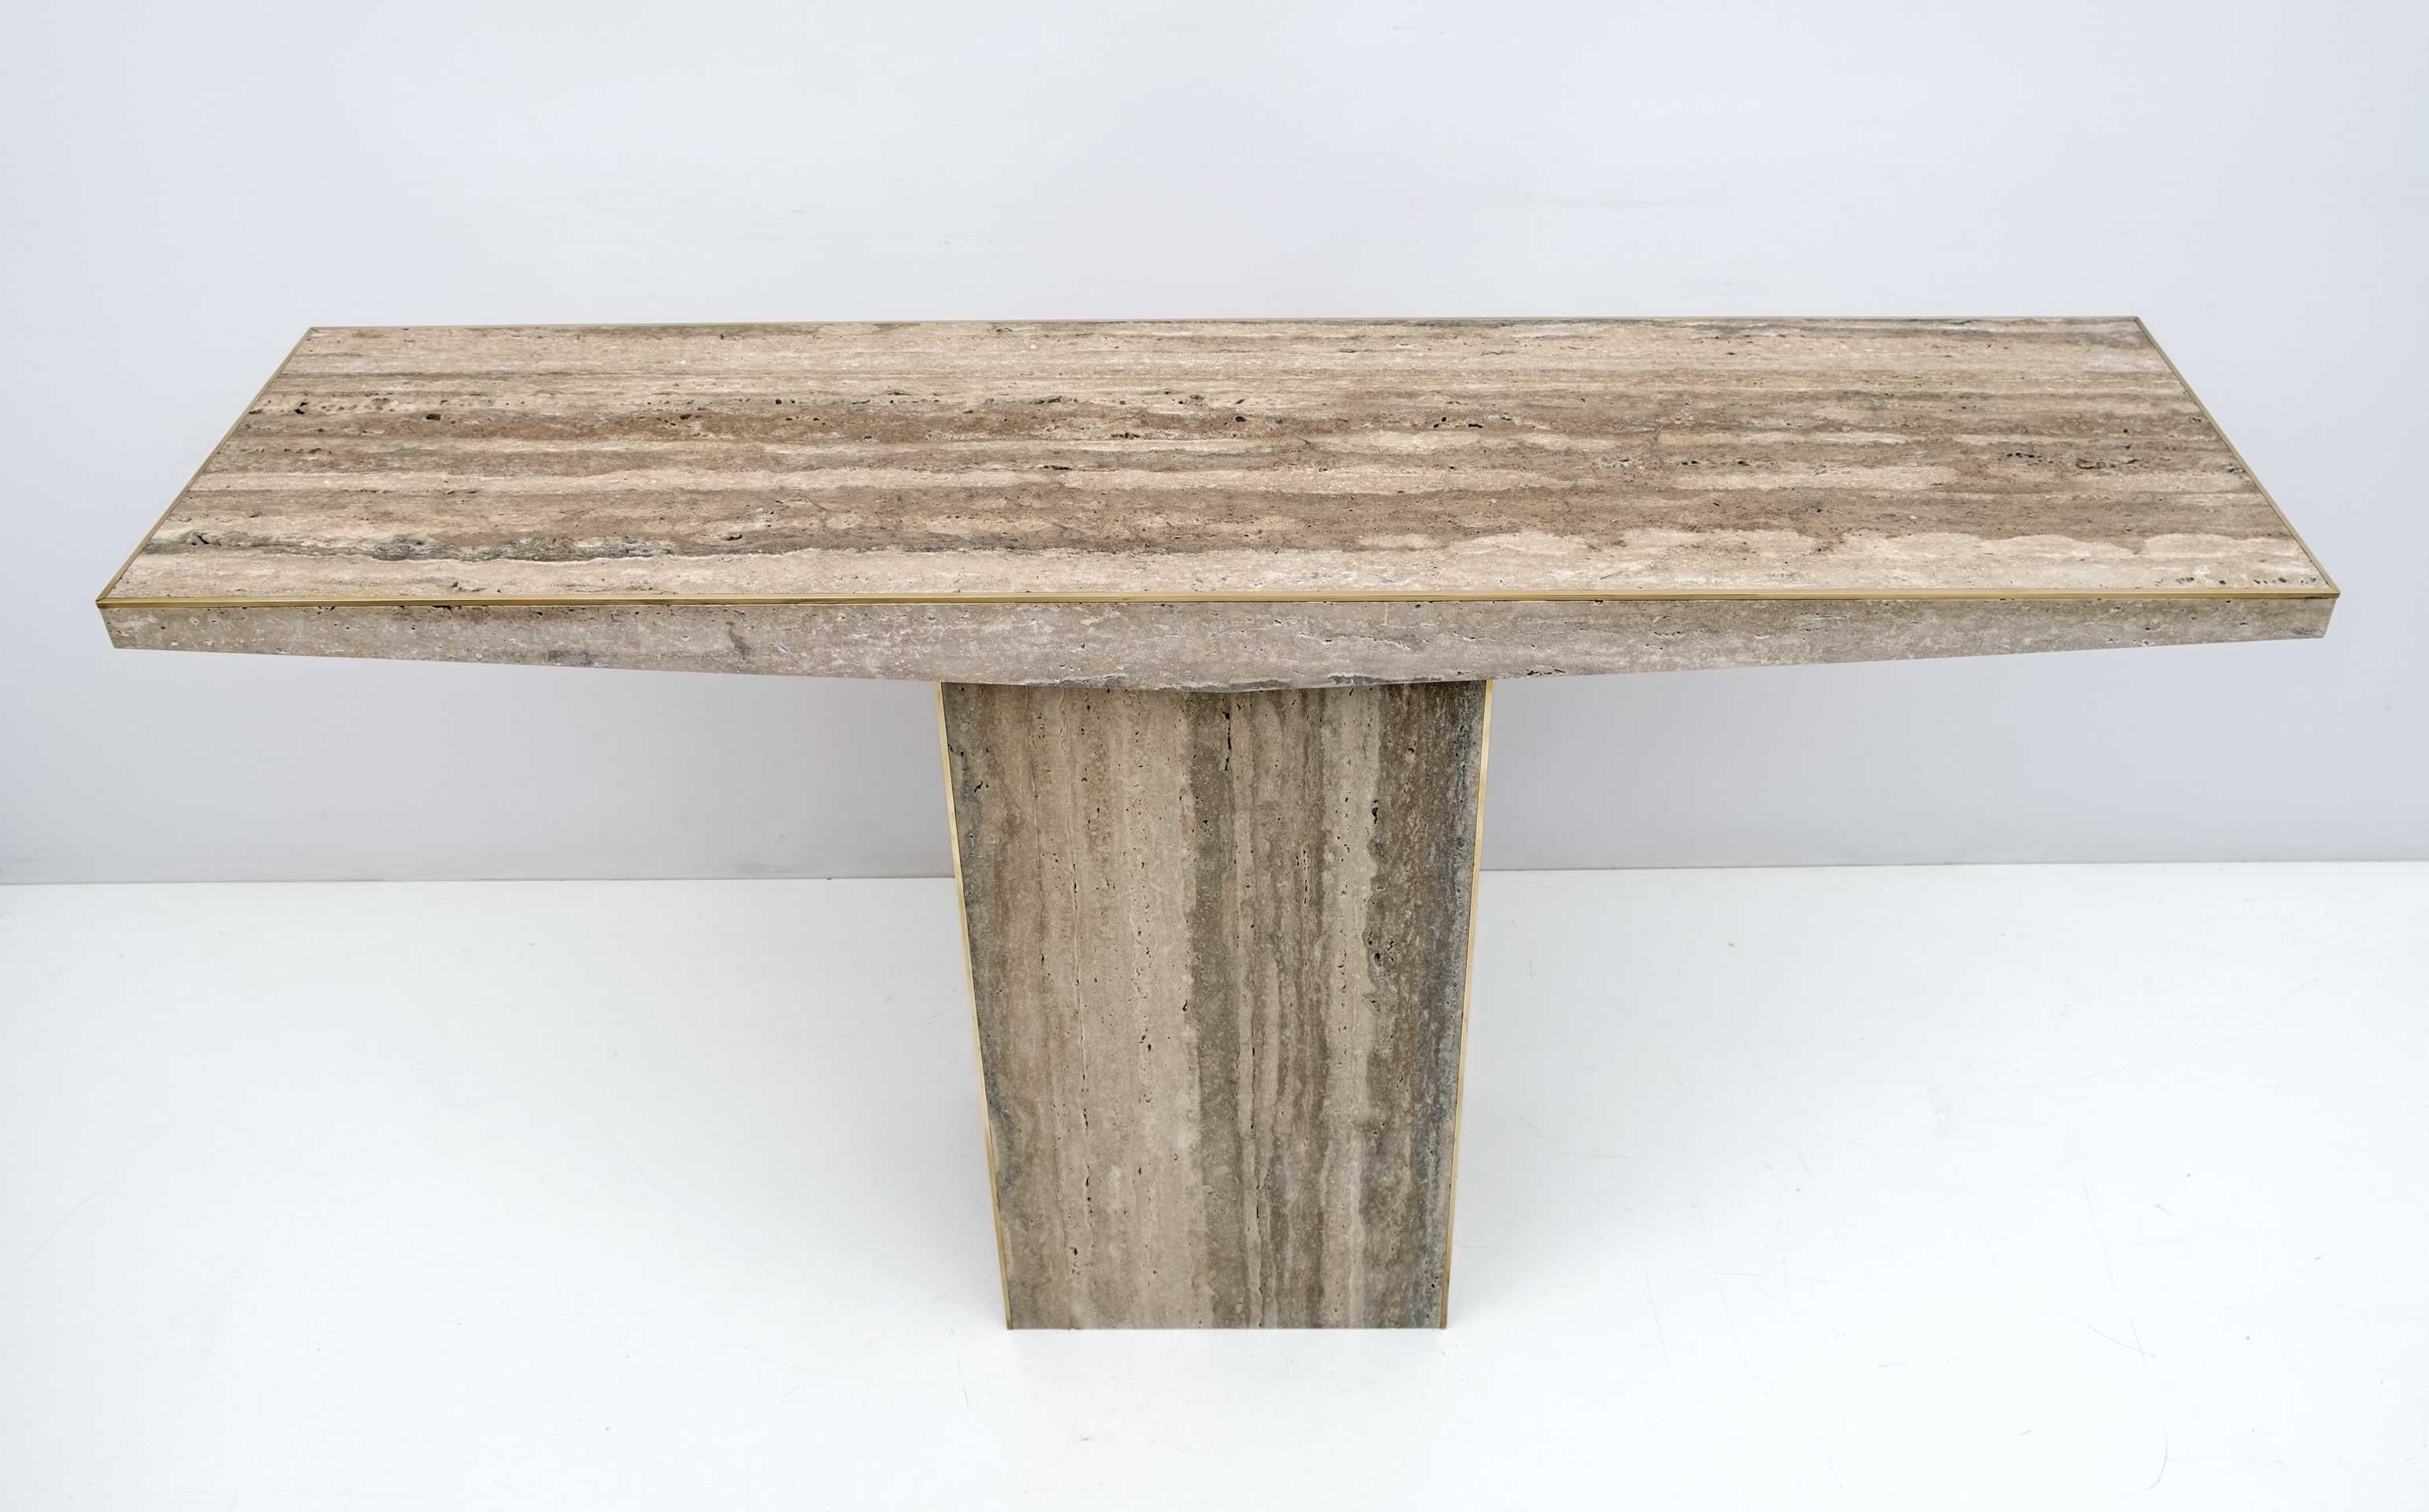 Pair of mid-century Italian travertine console tables.
Sanded, unfilled finish.
Decorative fine brass finish surrounding the top and bottom.

The price is for each.